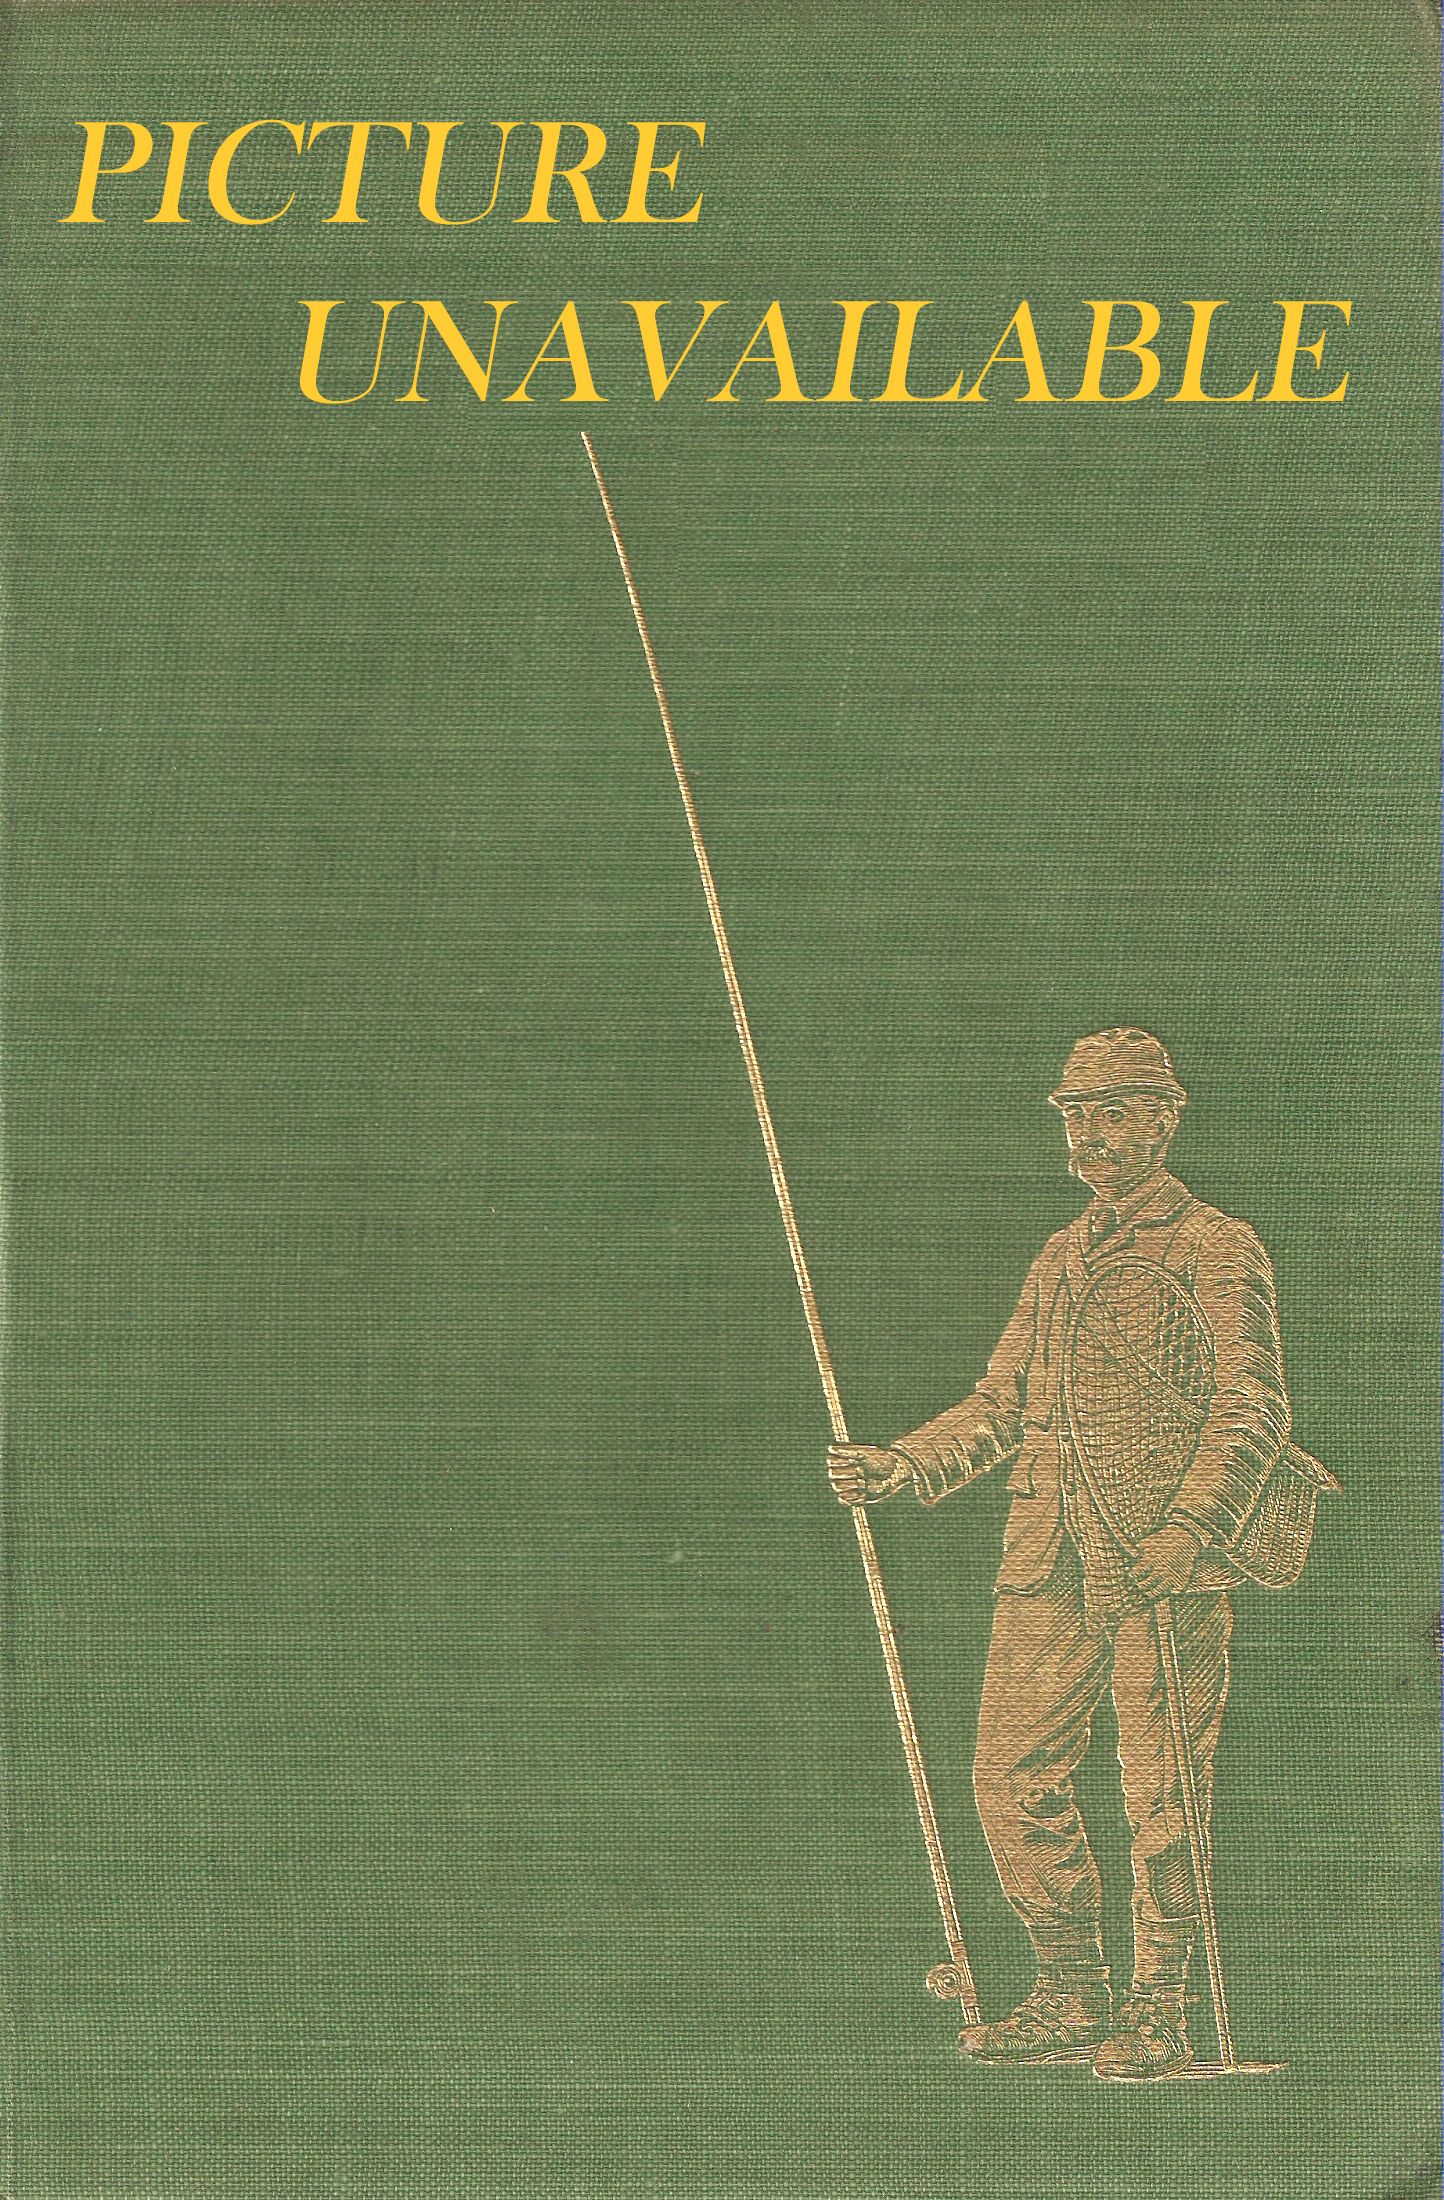 CREEL: A FISHING MAGAZINE. Volume 2, number 9. March 1965.